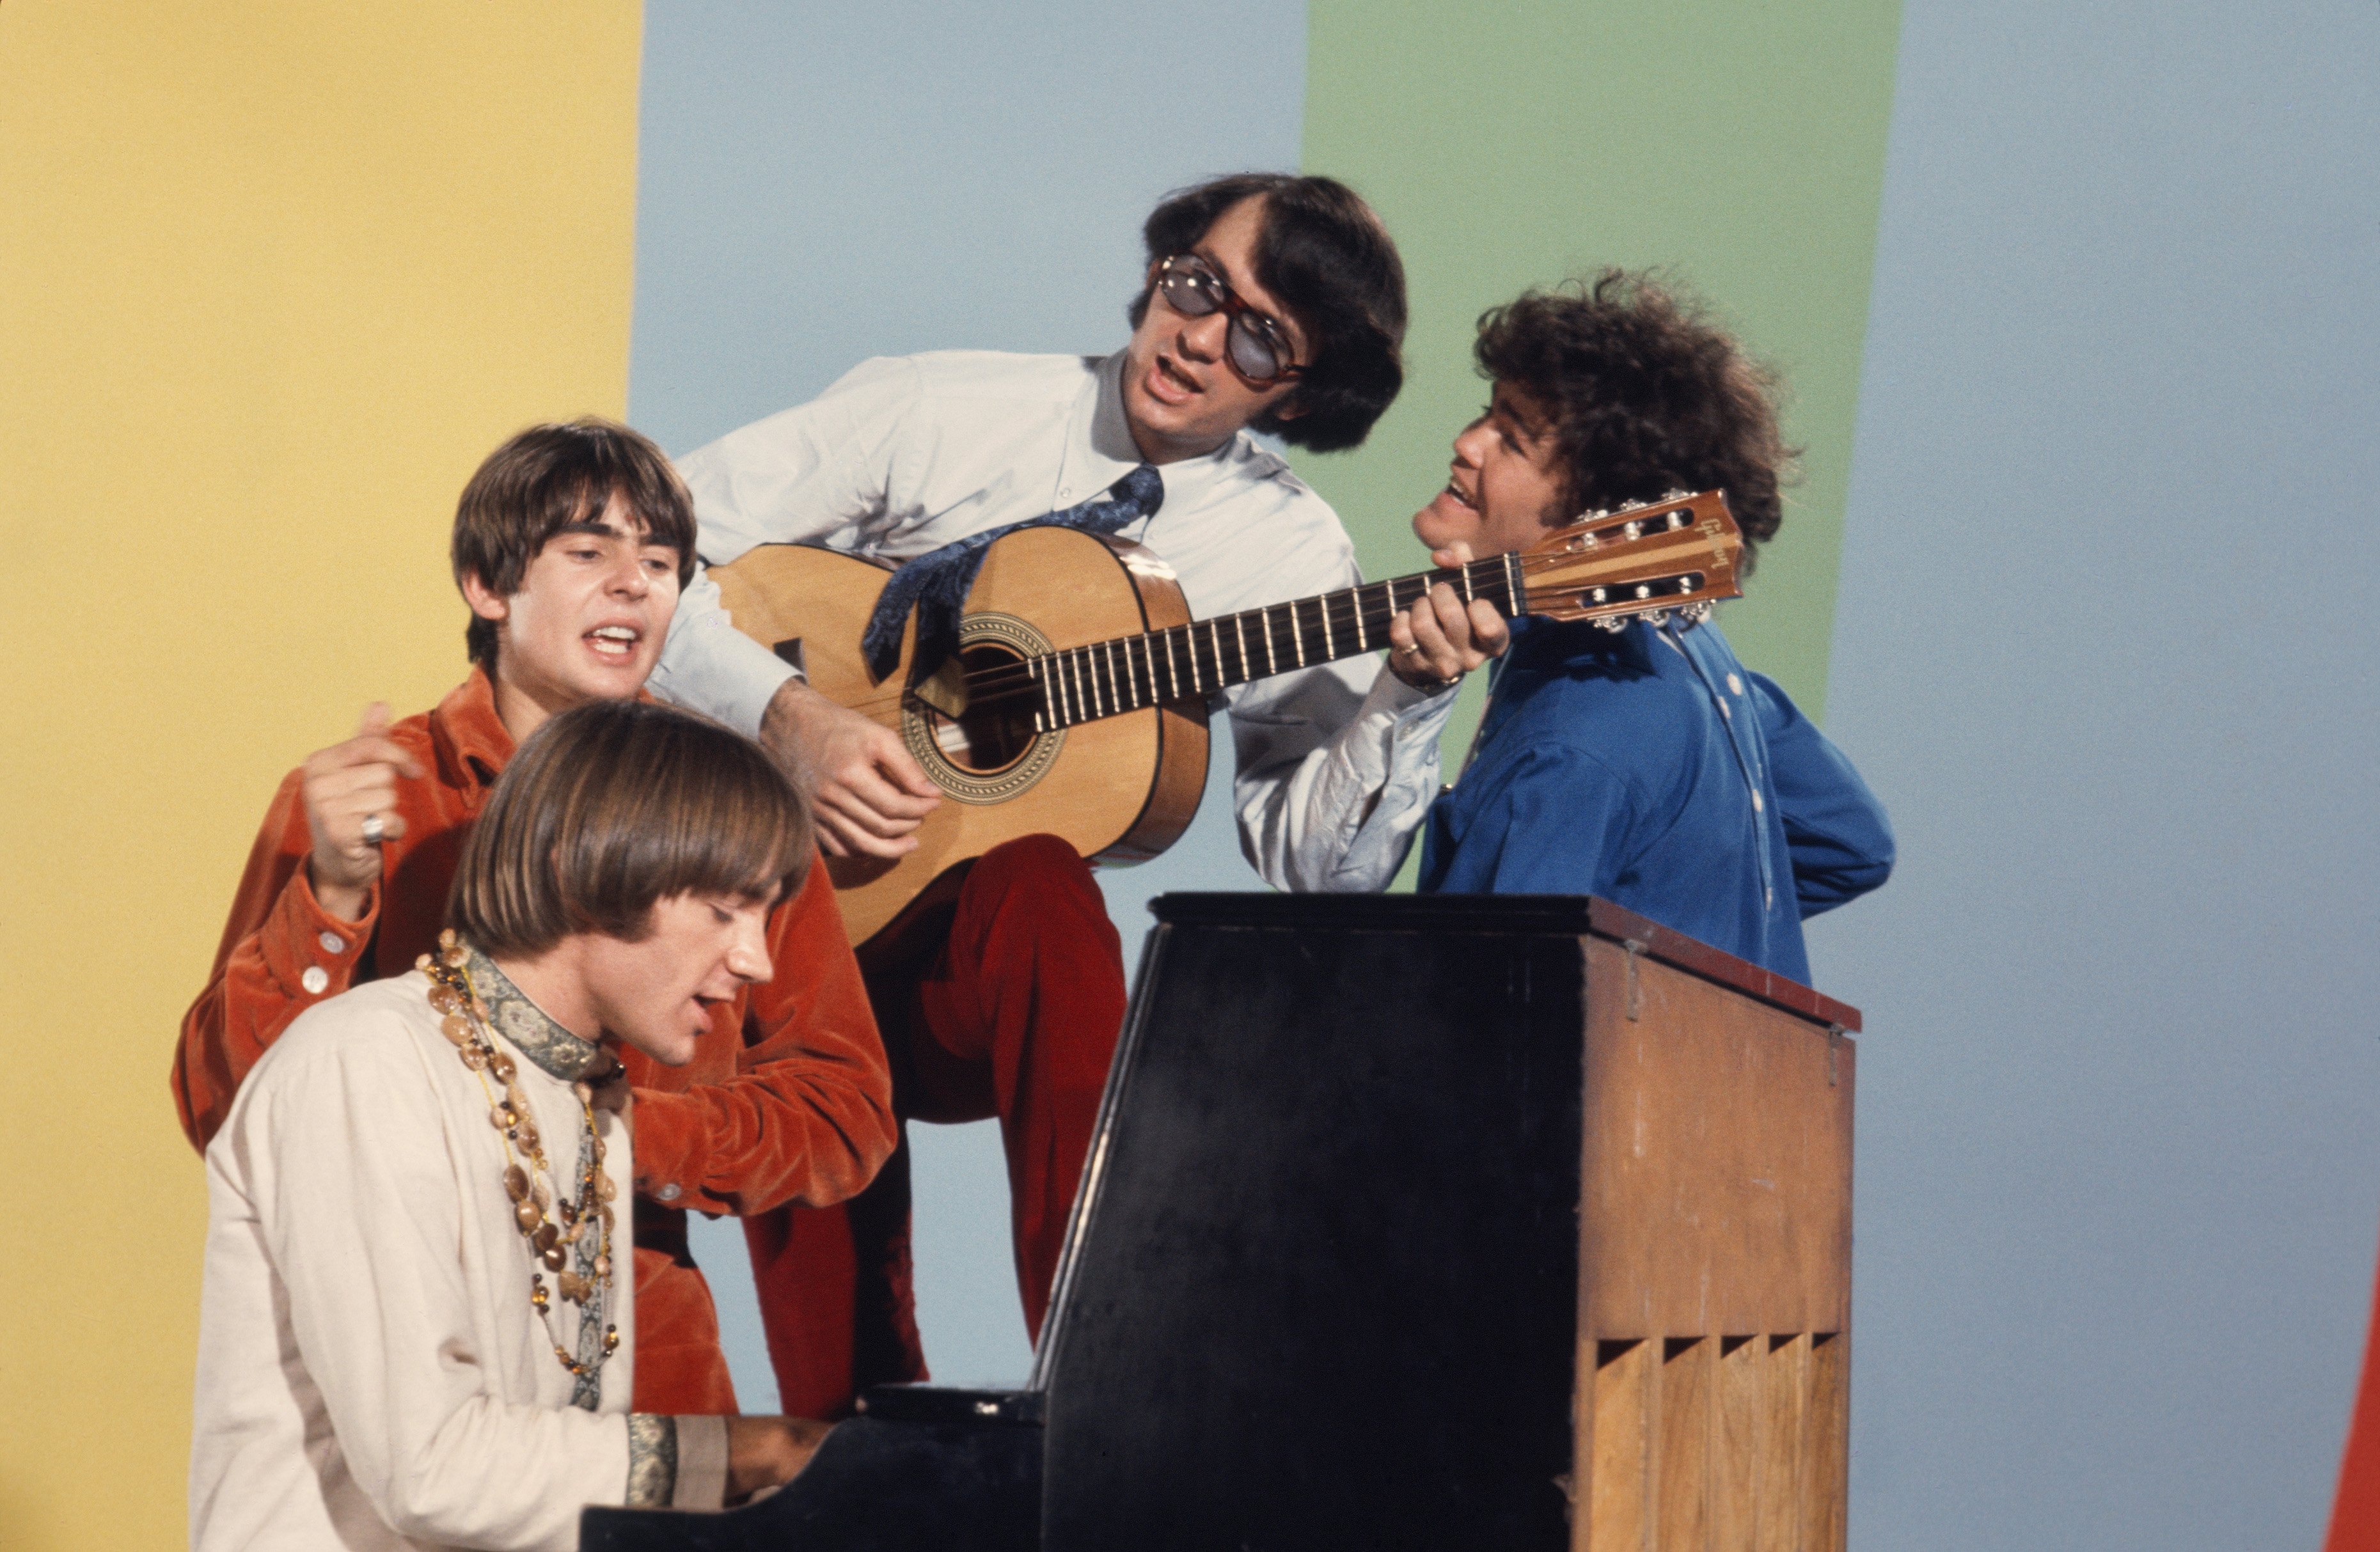 The Monkees' Davy Jones, Peter Tork, Mike Nesmith, and Micky Dolenz  with a piano during the "I'm a Believer" era